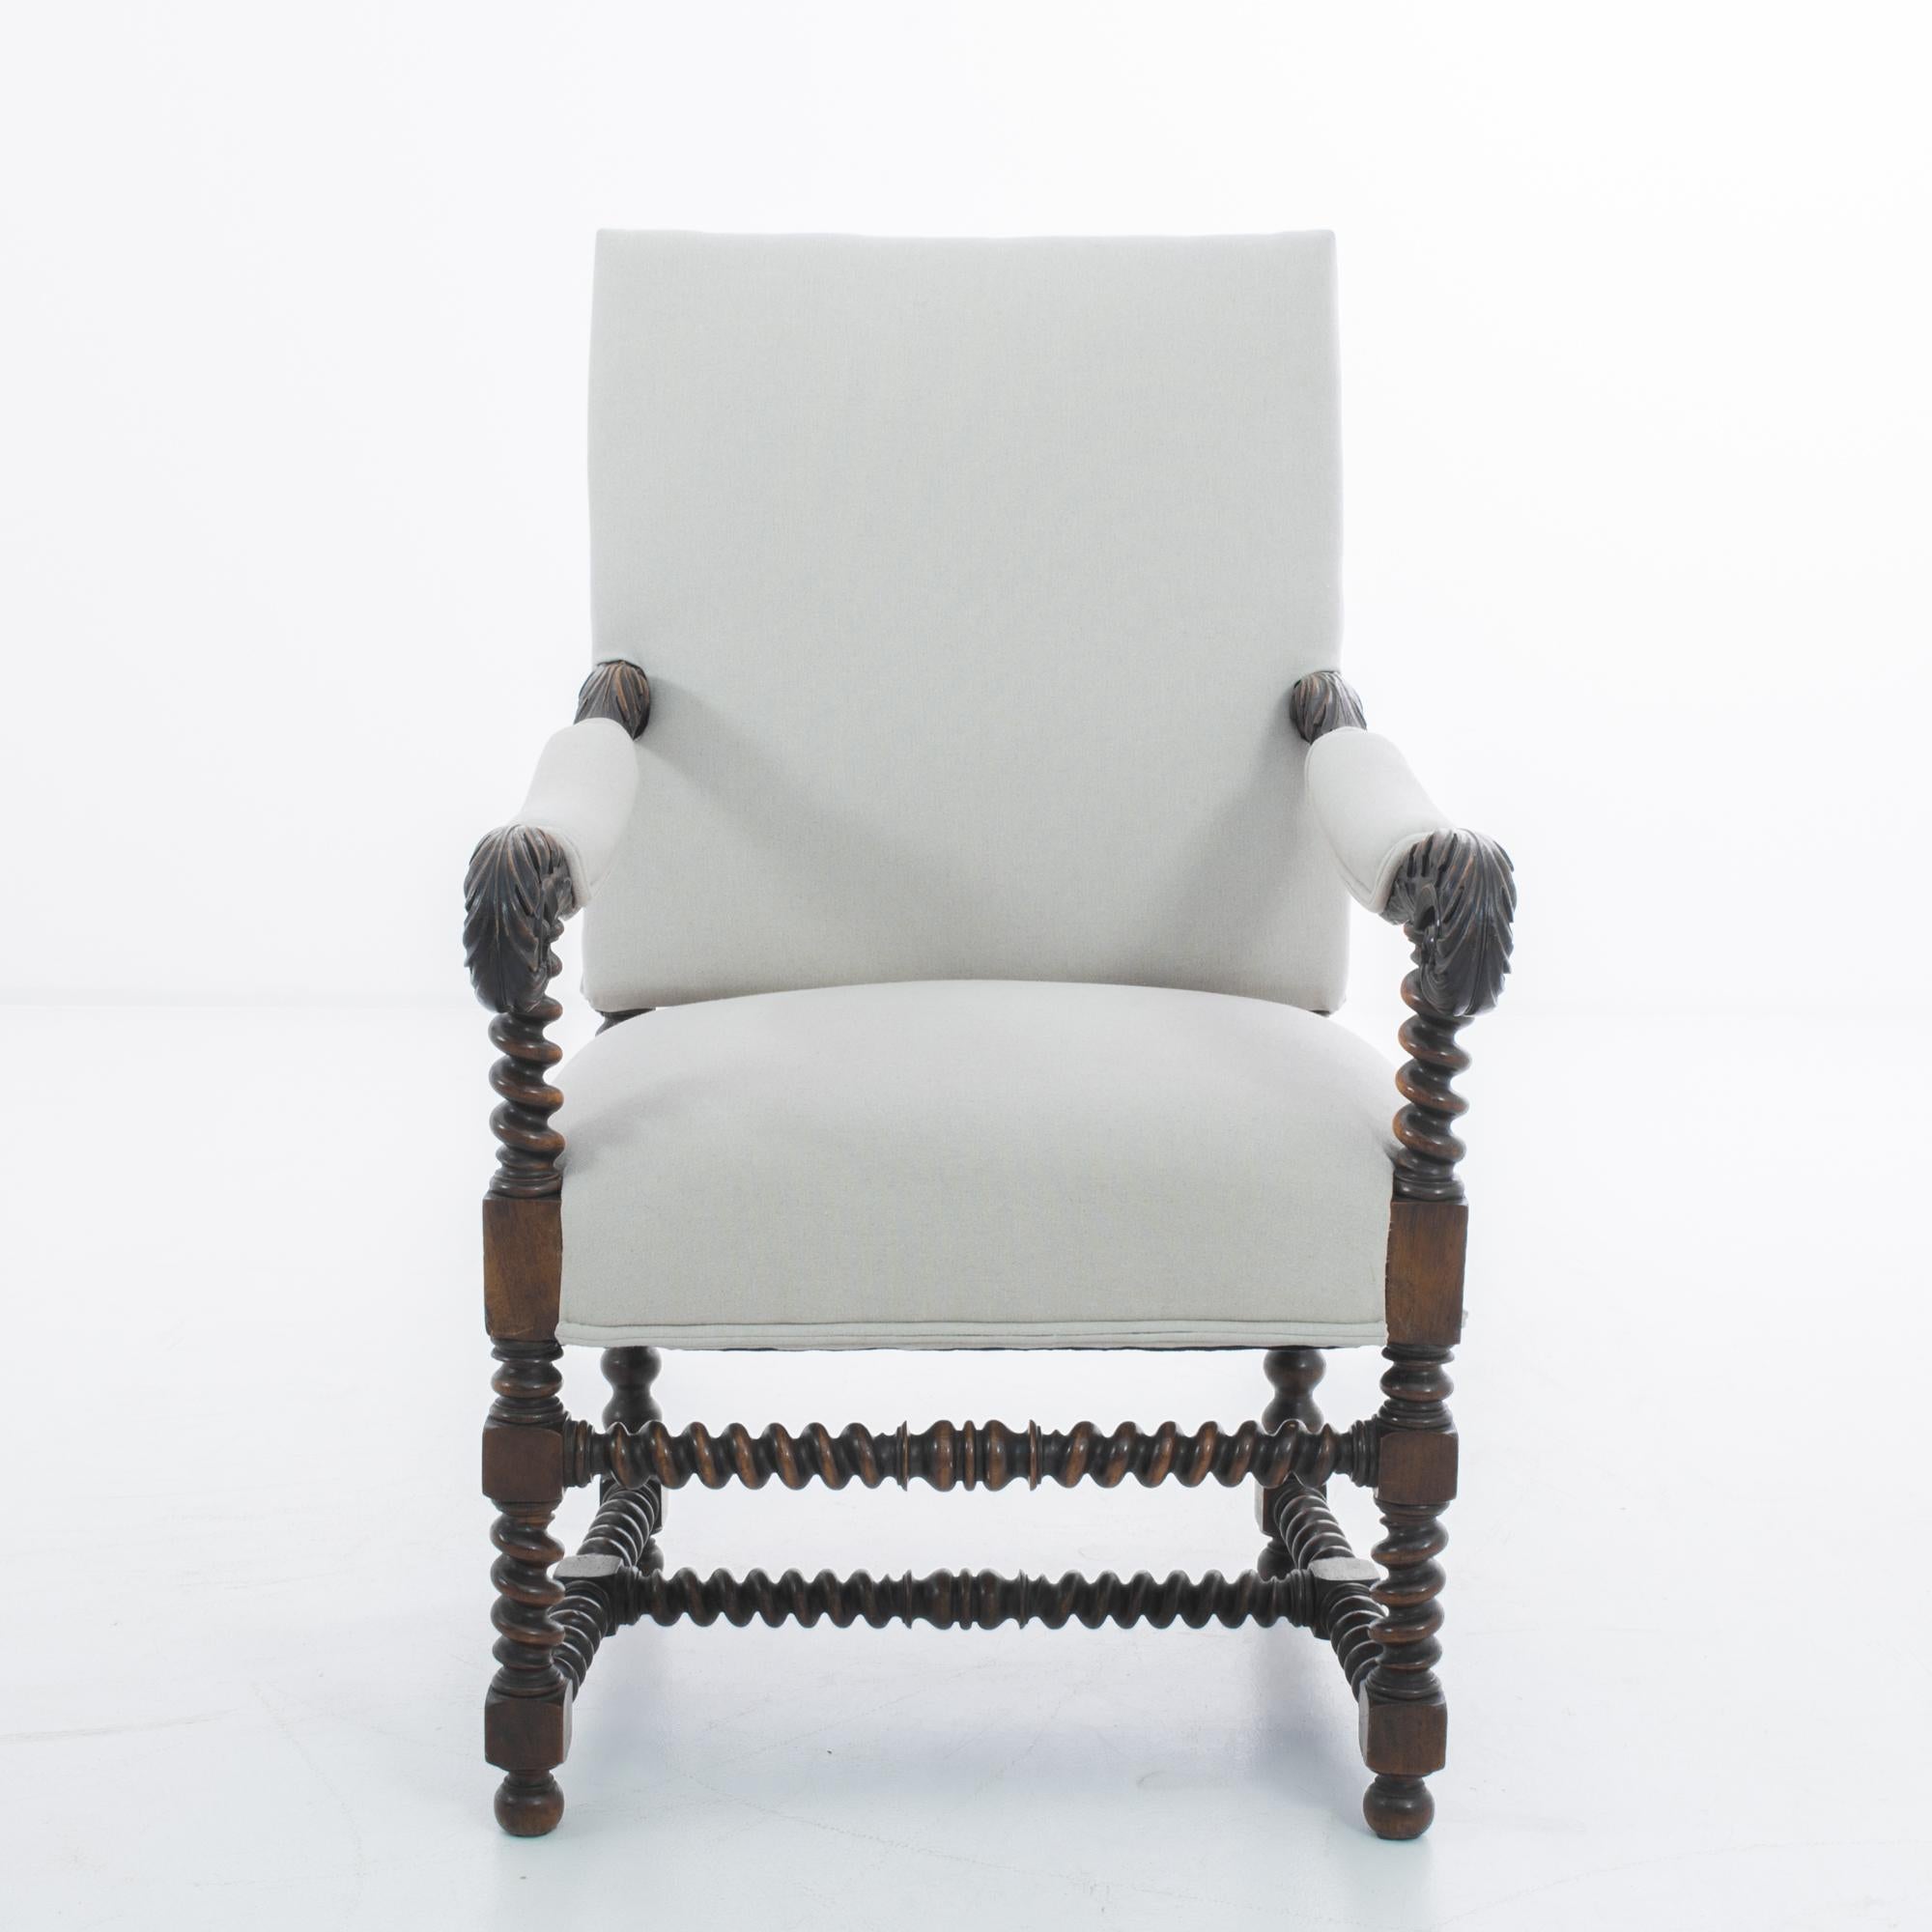 A wooden armchair from France, produced circa 1850. A regal antique, this stately armchair is newly upholstered in a grey fabric that contrasts just right with the dark stained wood. Lavishly carved with acanthus leaf armrests and barley twist